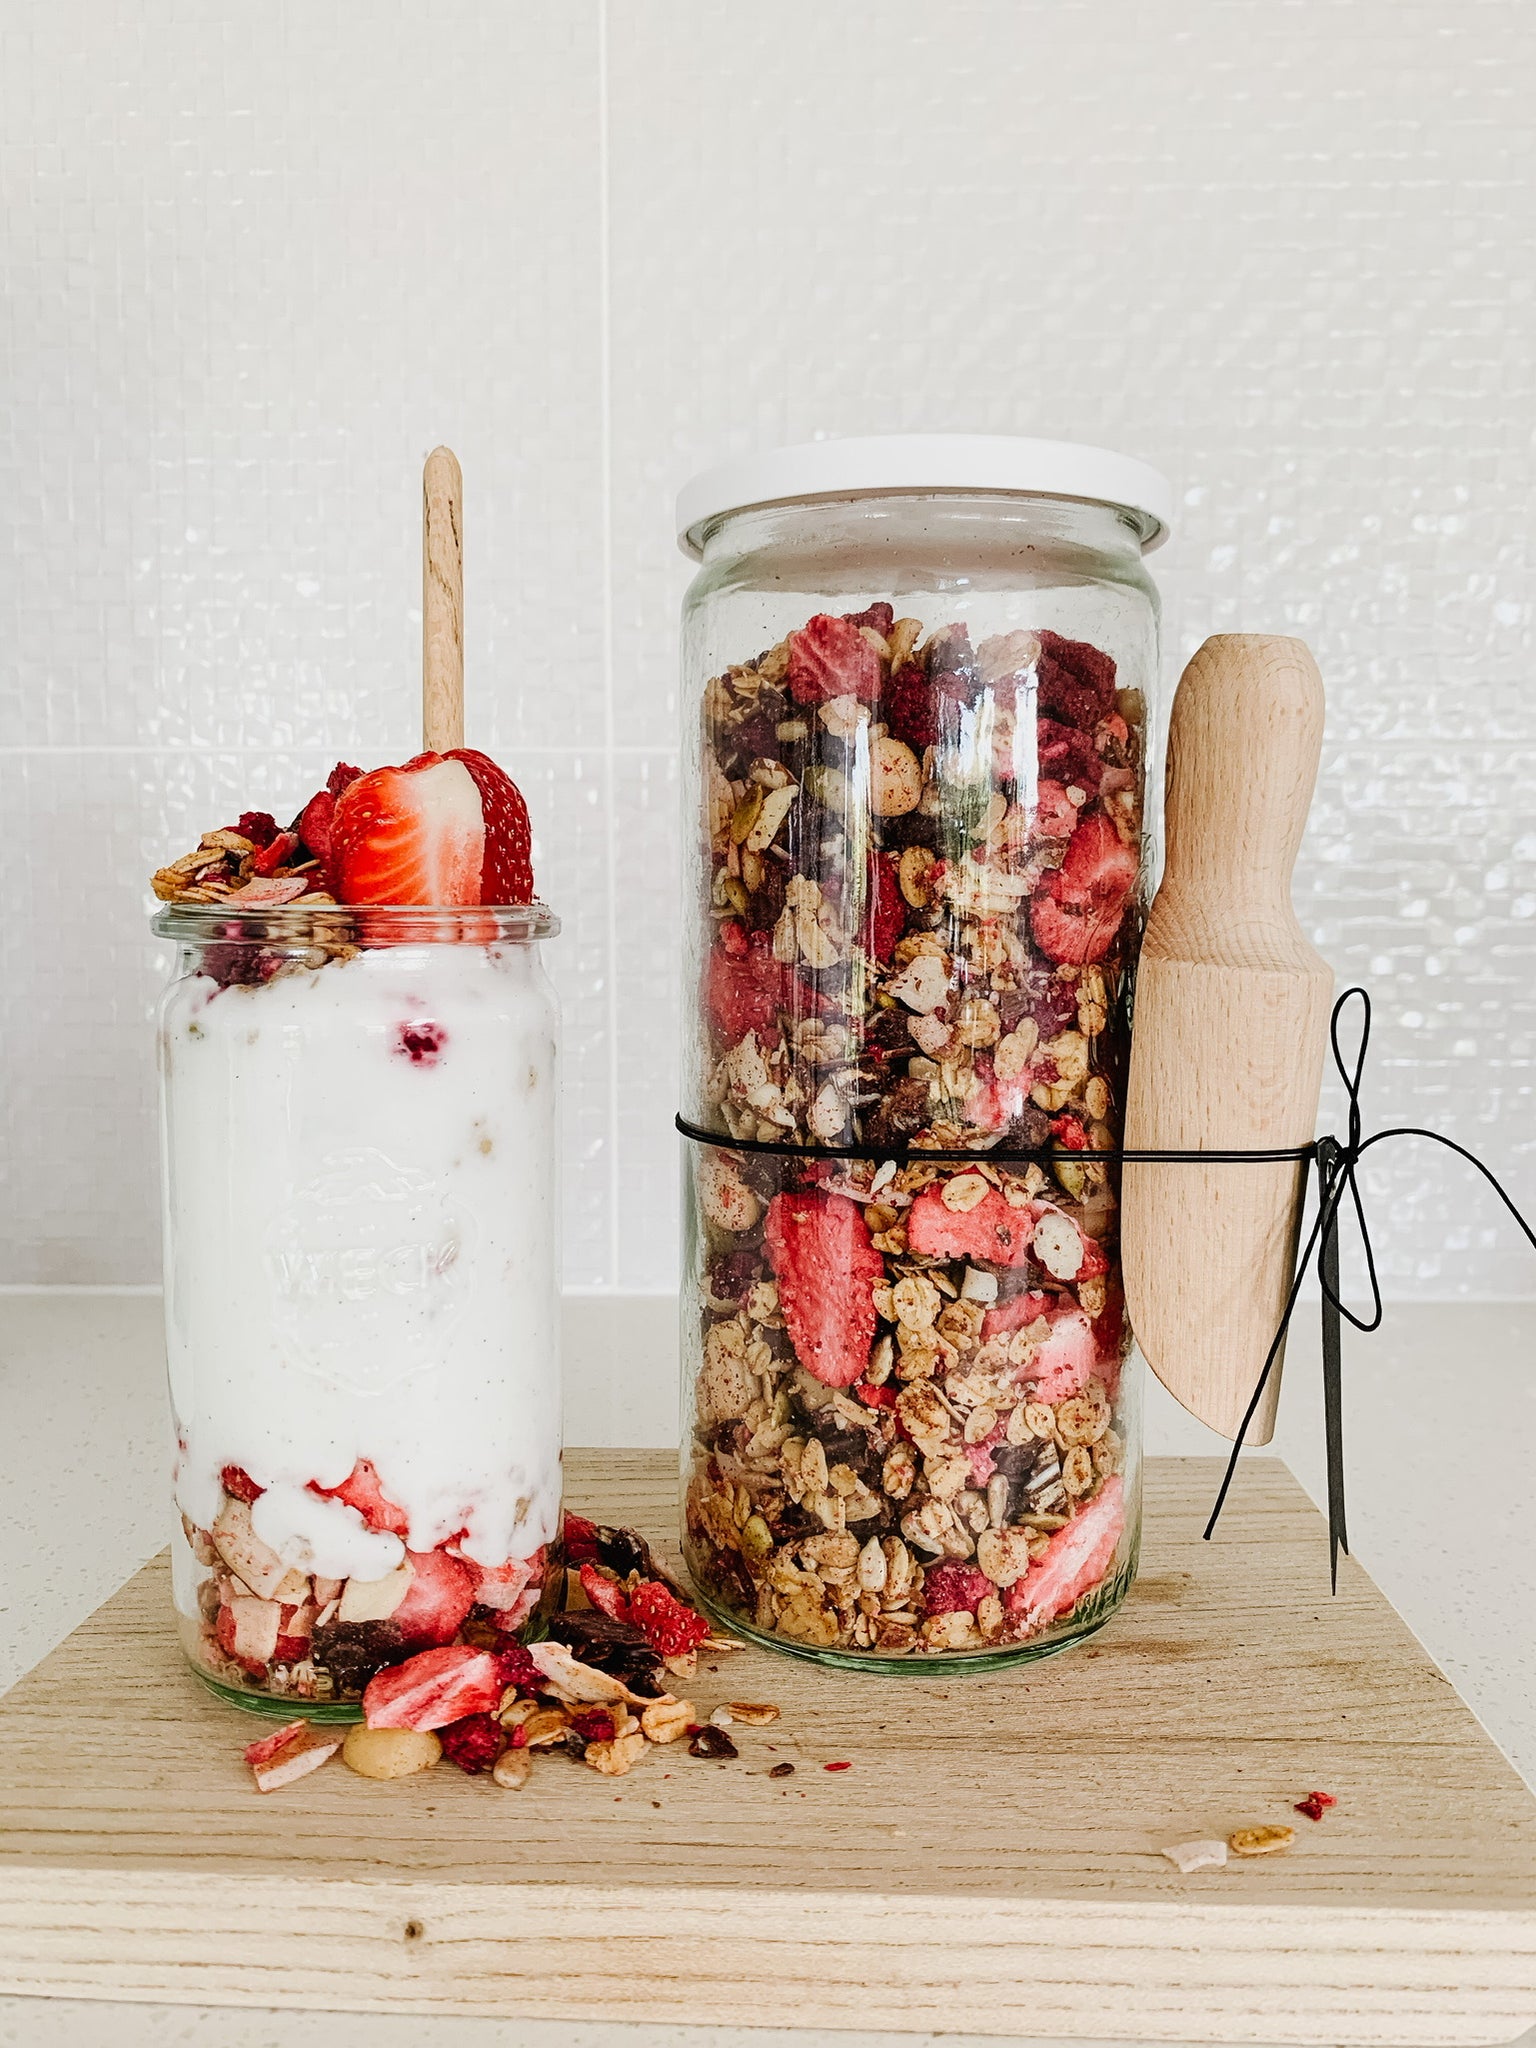 Chocolate Cluster Granola a Home Isolation Treat